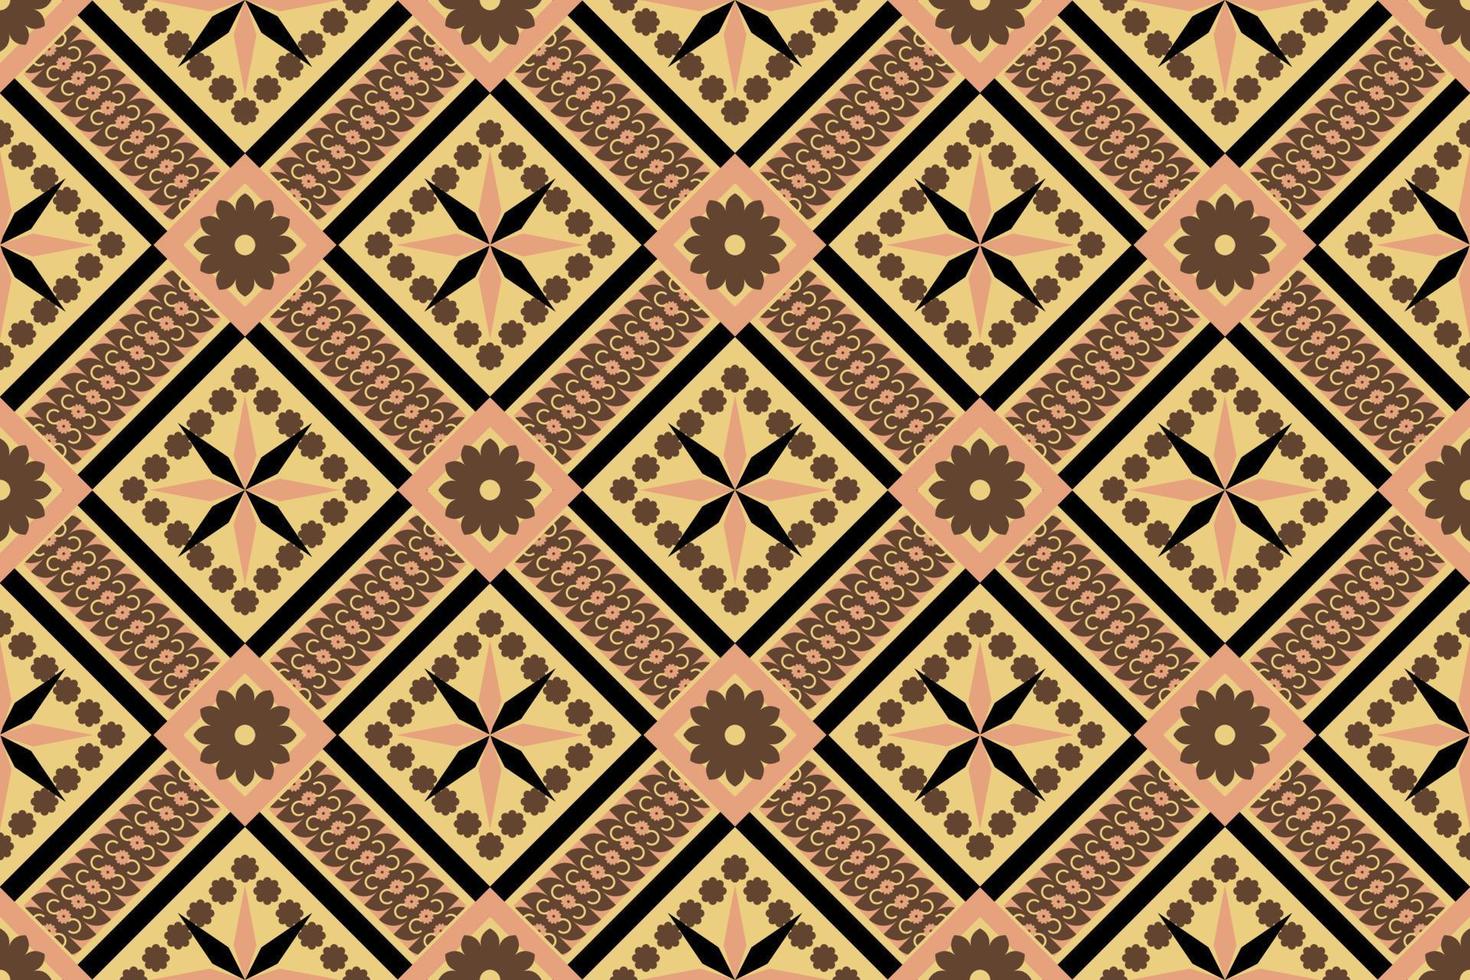 Brown-tone geometric ethnic seamless pattern designed for background, wallpaper, traditional clothing, carpet, curtain, and home decoration. vector